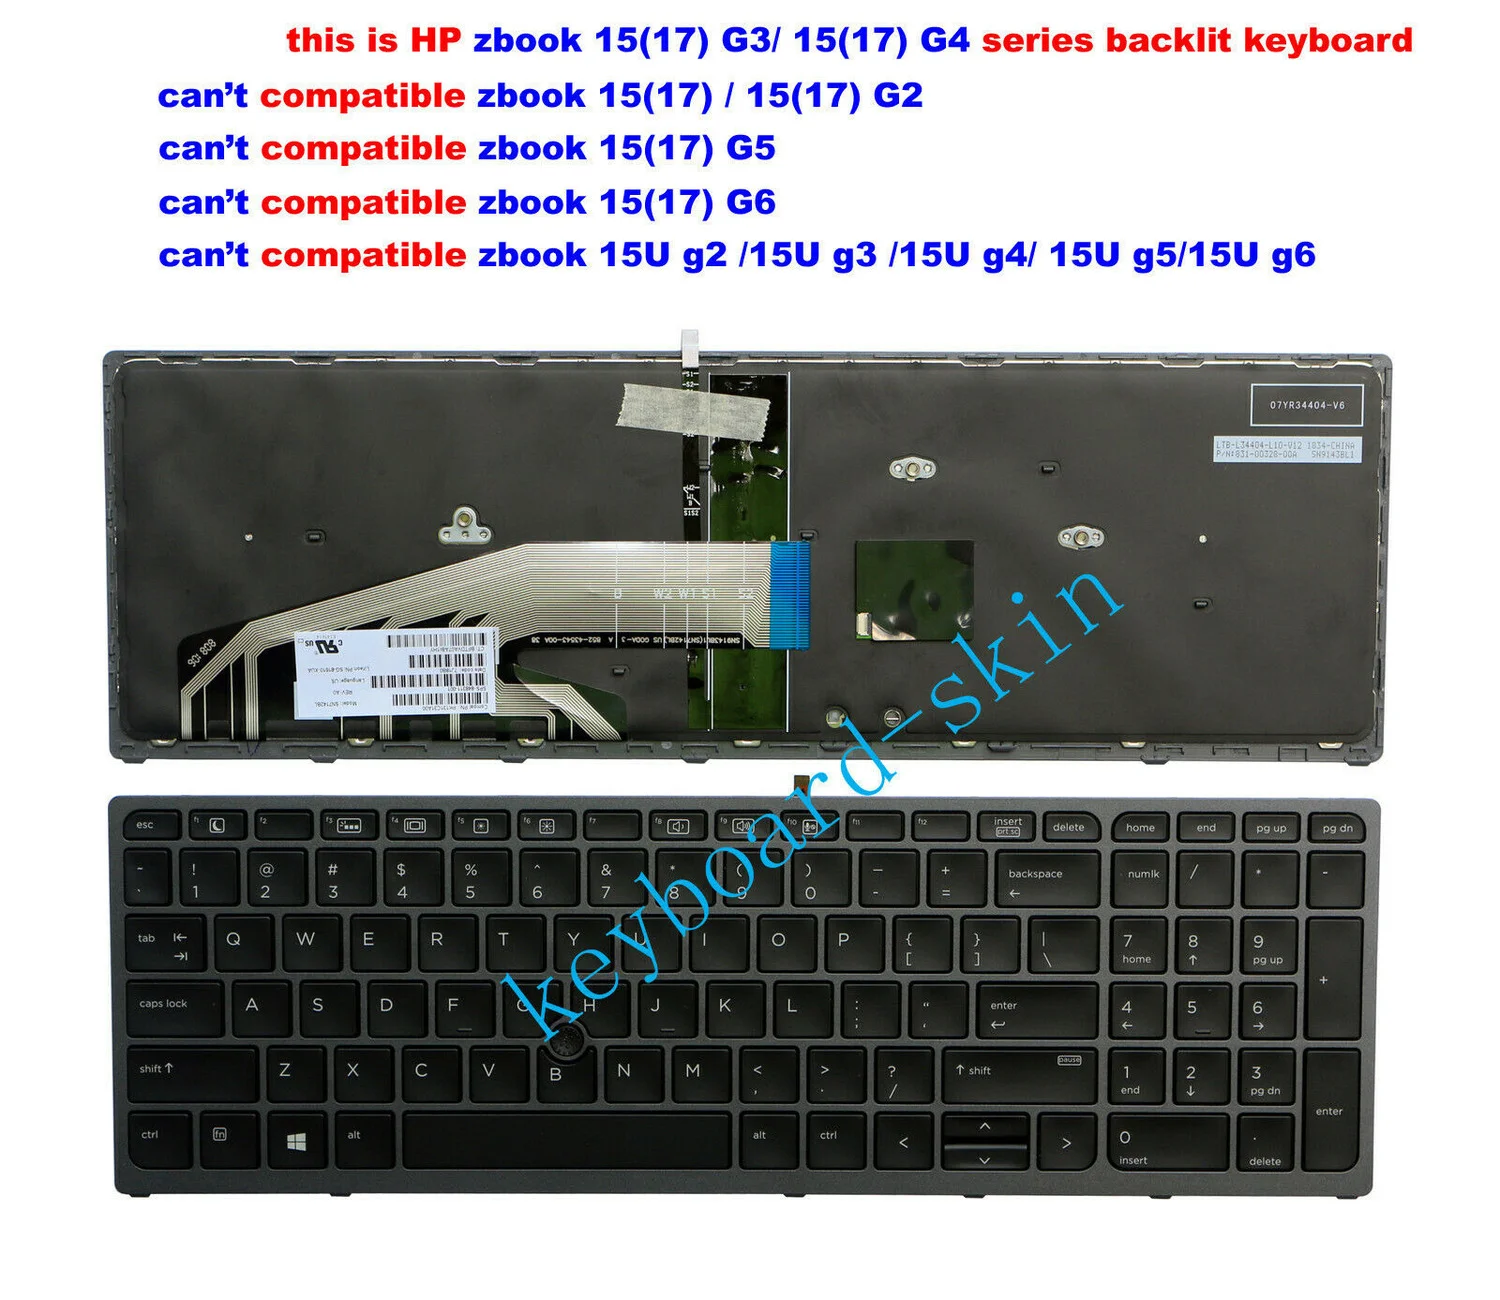 New US backlit Keyboard for HP Zbook 15 G3 G4/17 G3 G4 84831